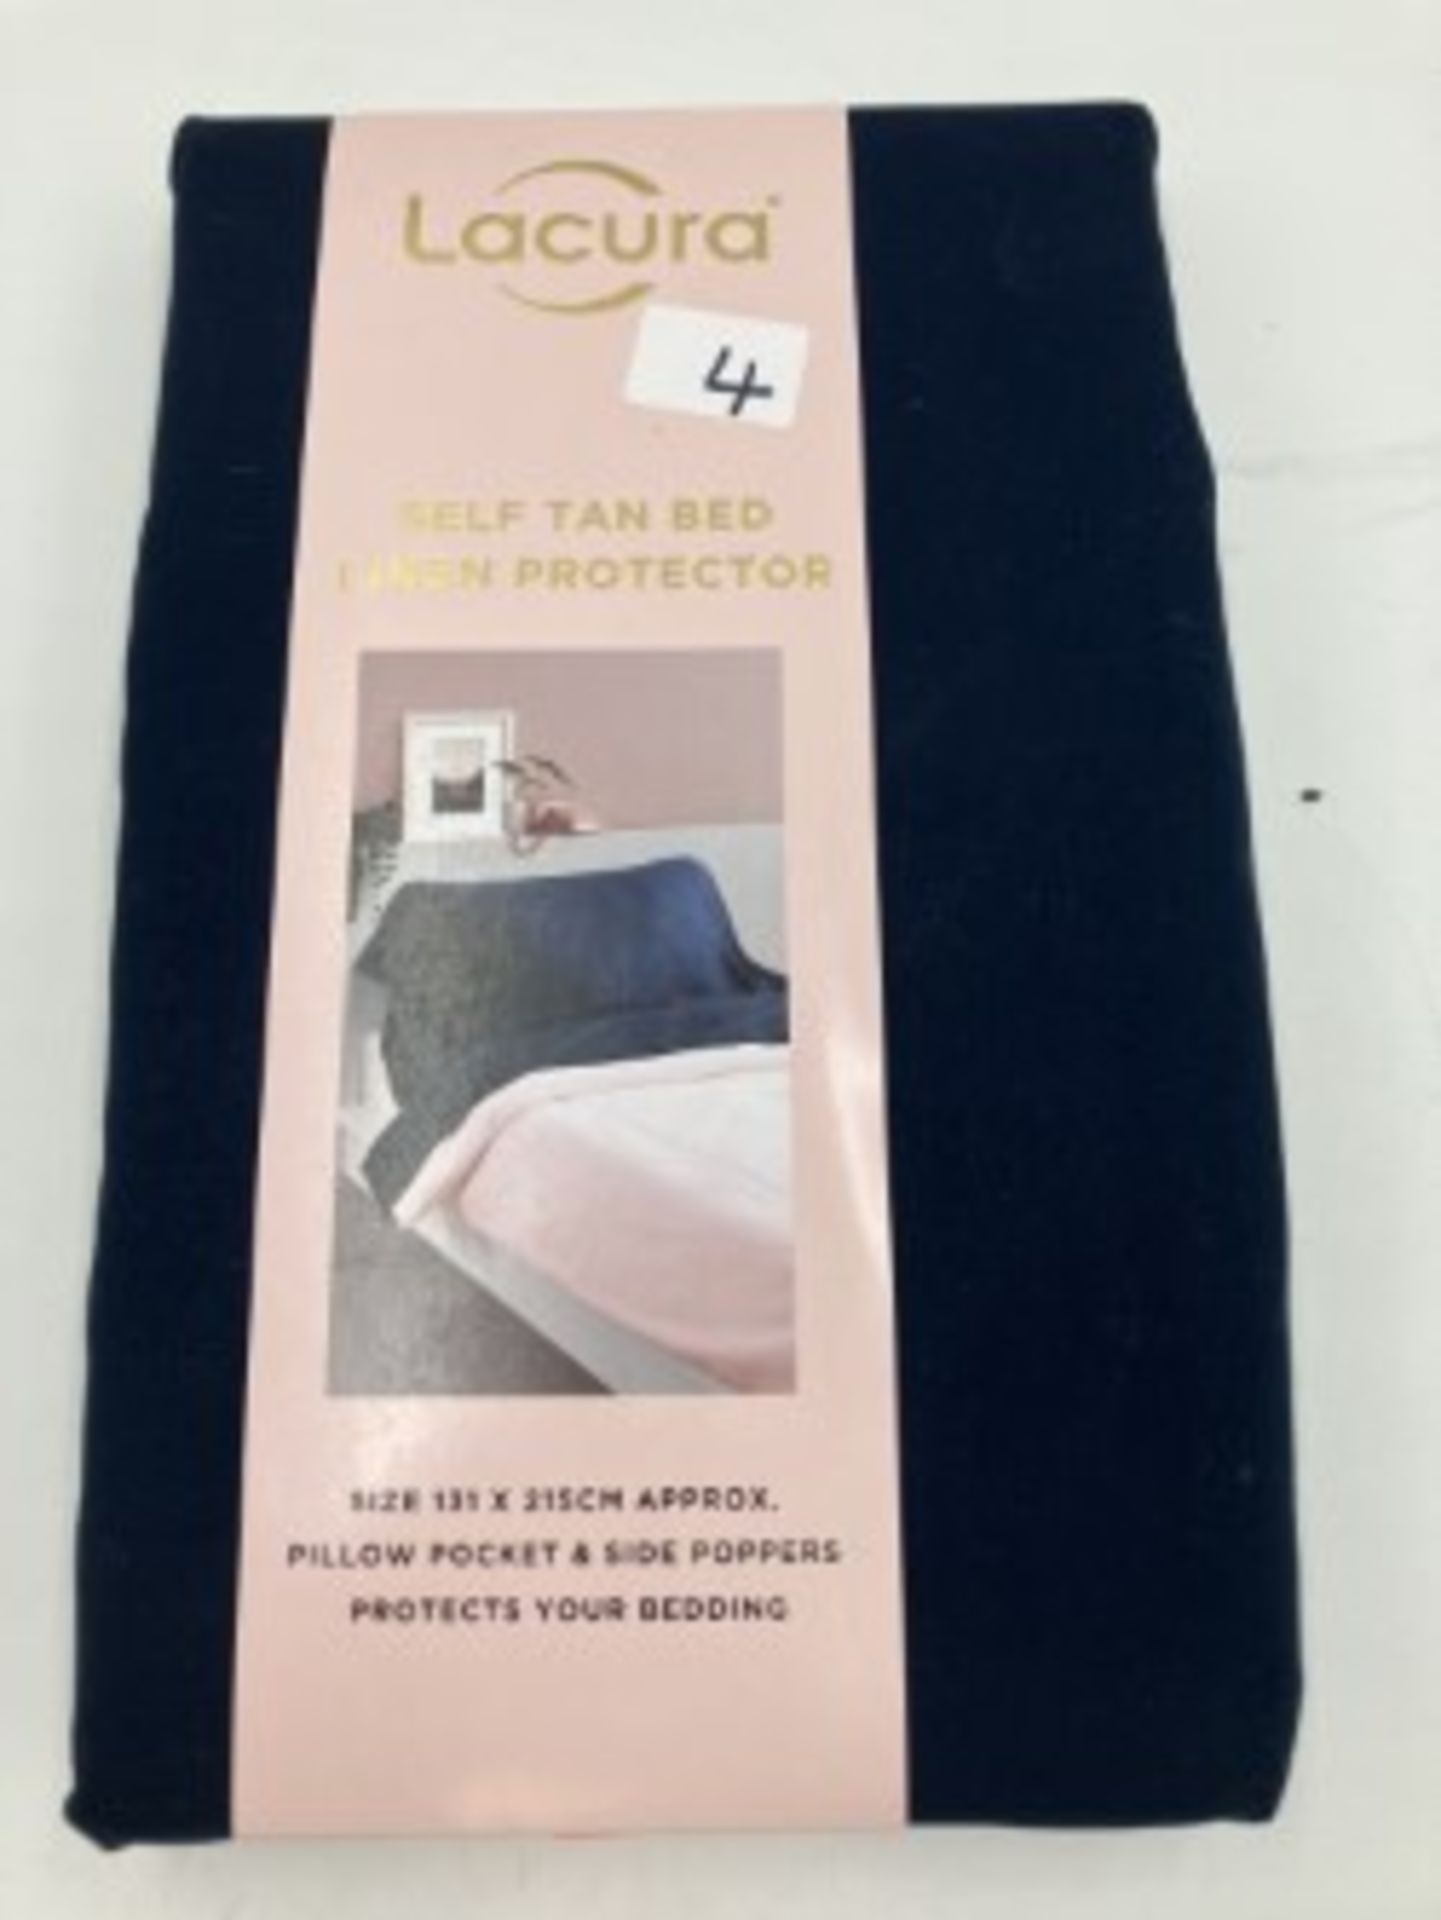 LACURA SELF TAN BED LINEN PROTECTOR - NAVY -9812 - Image 2 of 2